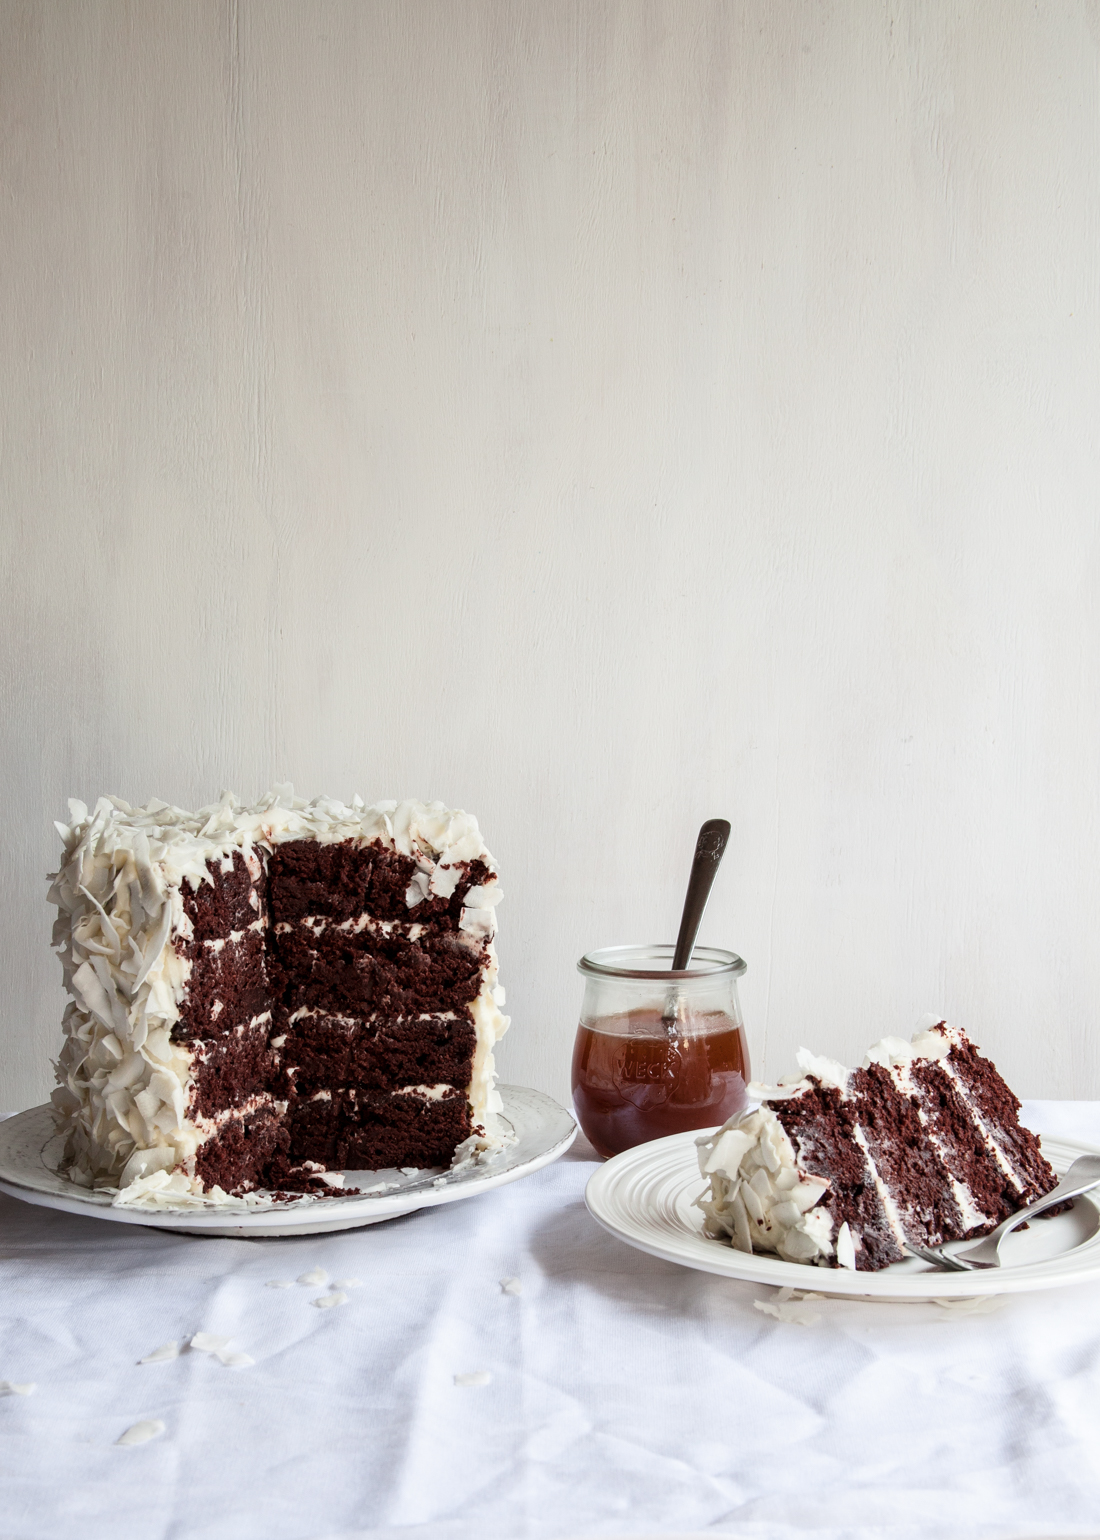 Outtake from "Layered" of the Chocolate Coconut Cake.